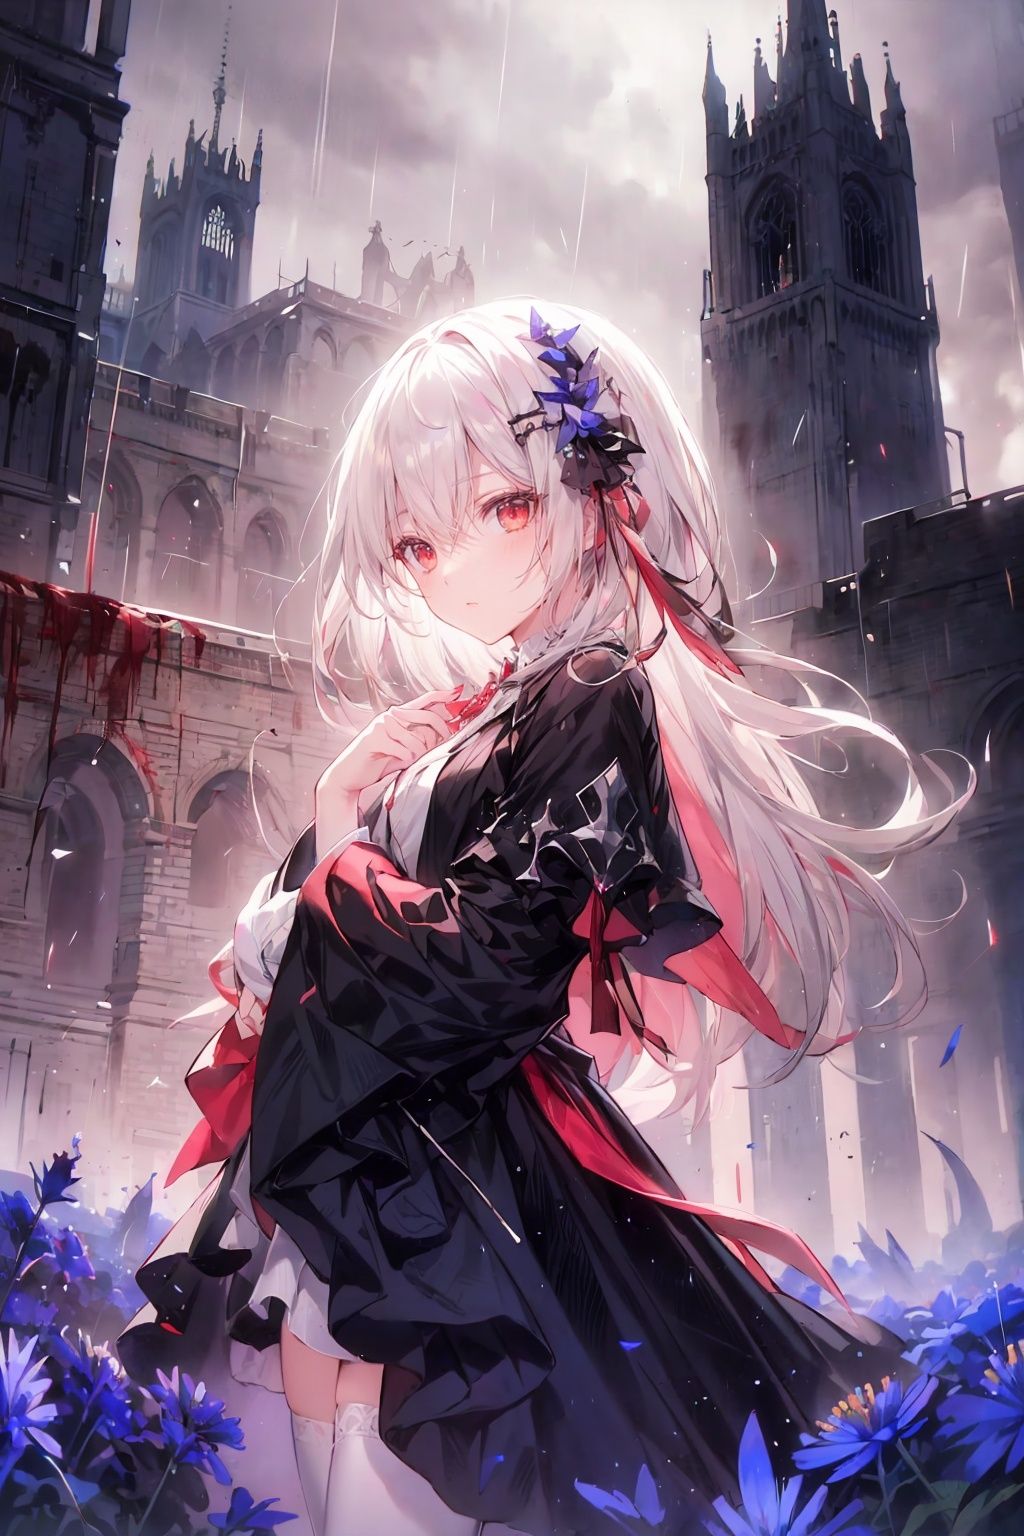 ((1girl,solo, alone, delicate face, cute, red eye pupil, pink eyelashes, red eye shadow, pink lips,excellent face,expression is enchanting,)), Character close-up,
leaning against the ruins, with a floating skeleton in the background.(white stockings),her posture is seductive, her hand is holding her face, and there is a flicker of evil energy runes in the background, blood mist filled, and soft light. Official art, unit 8 k wallpaper, ultra detailed, beautiful and aesthetic, masterpiece, best quality, extremely detailed, dynamic angle, paper skin, radius, iuminosity, cowboyshot, the most beautiful form of Chaos, elegant, a brutalist designed, visual colors, romanticism, by James Jean, roby dwi antono, cross tran, francis bacon, Michael mraz, Adrian ghenie, Petra cortright, Gerhard richter, Takato yamamoto, ashley wood, atmospheric, ((late at night,dark)), light rain,dark, limited palette, contrast,(((Cornflower))), corn